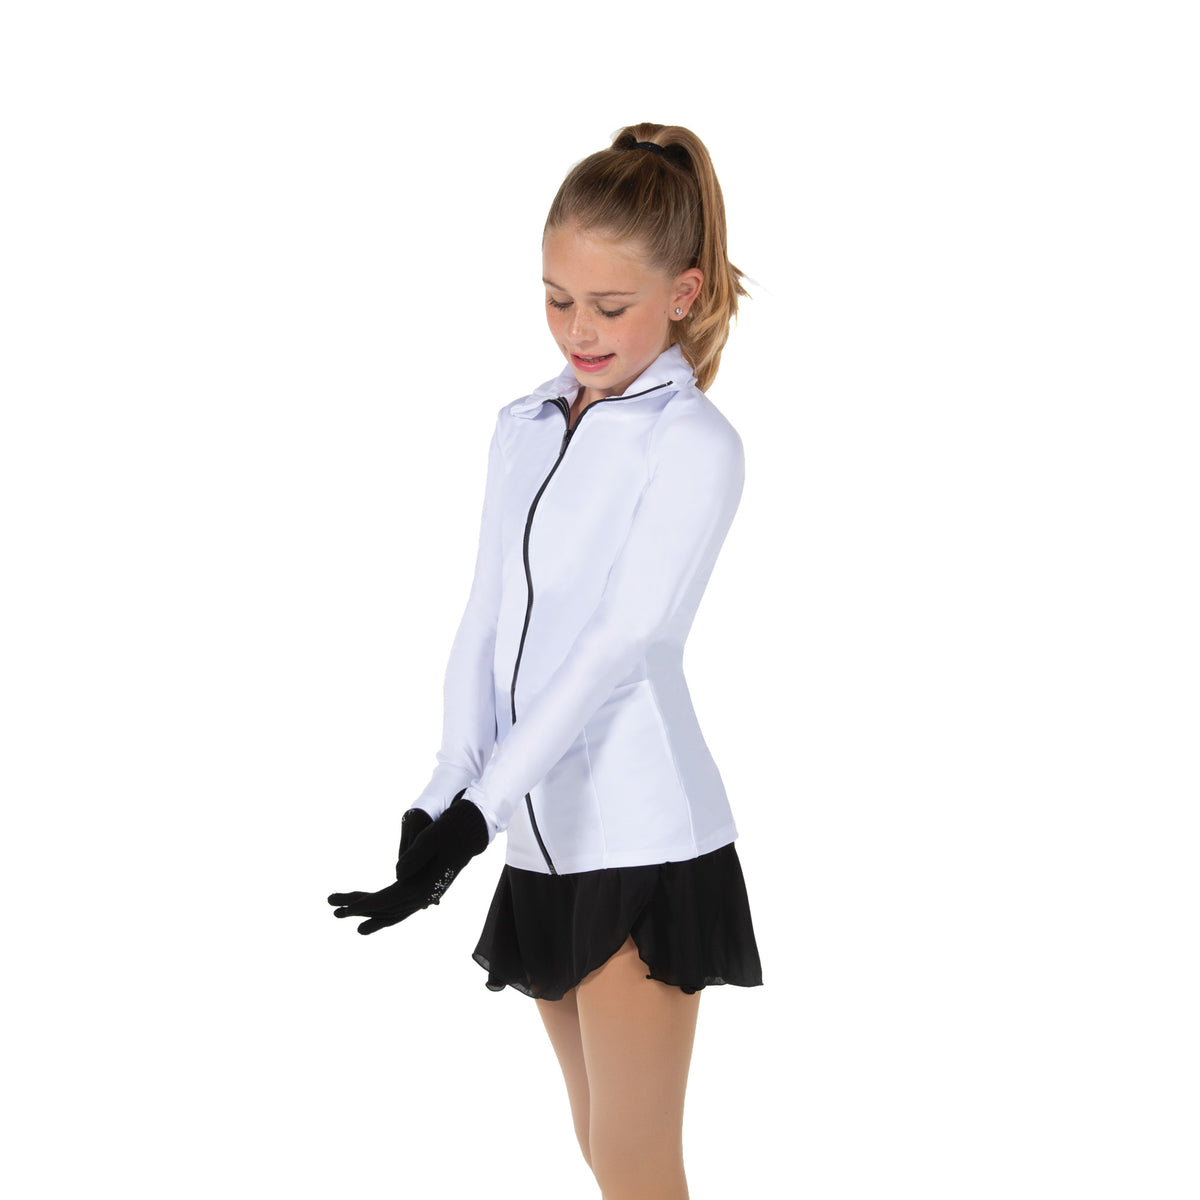 S206 Competition Figure Skating Supplex Extend Jacket